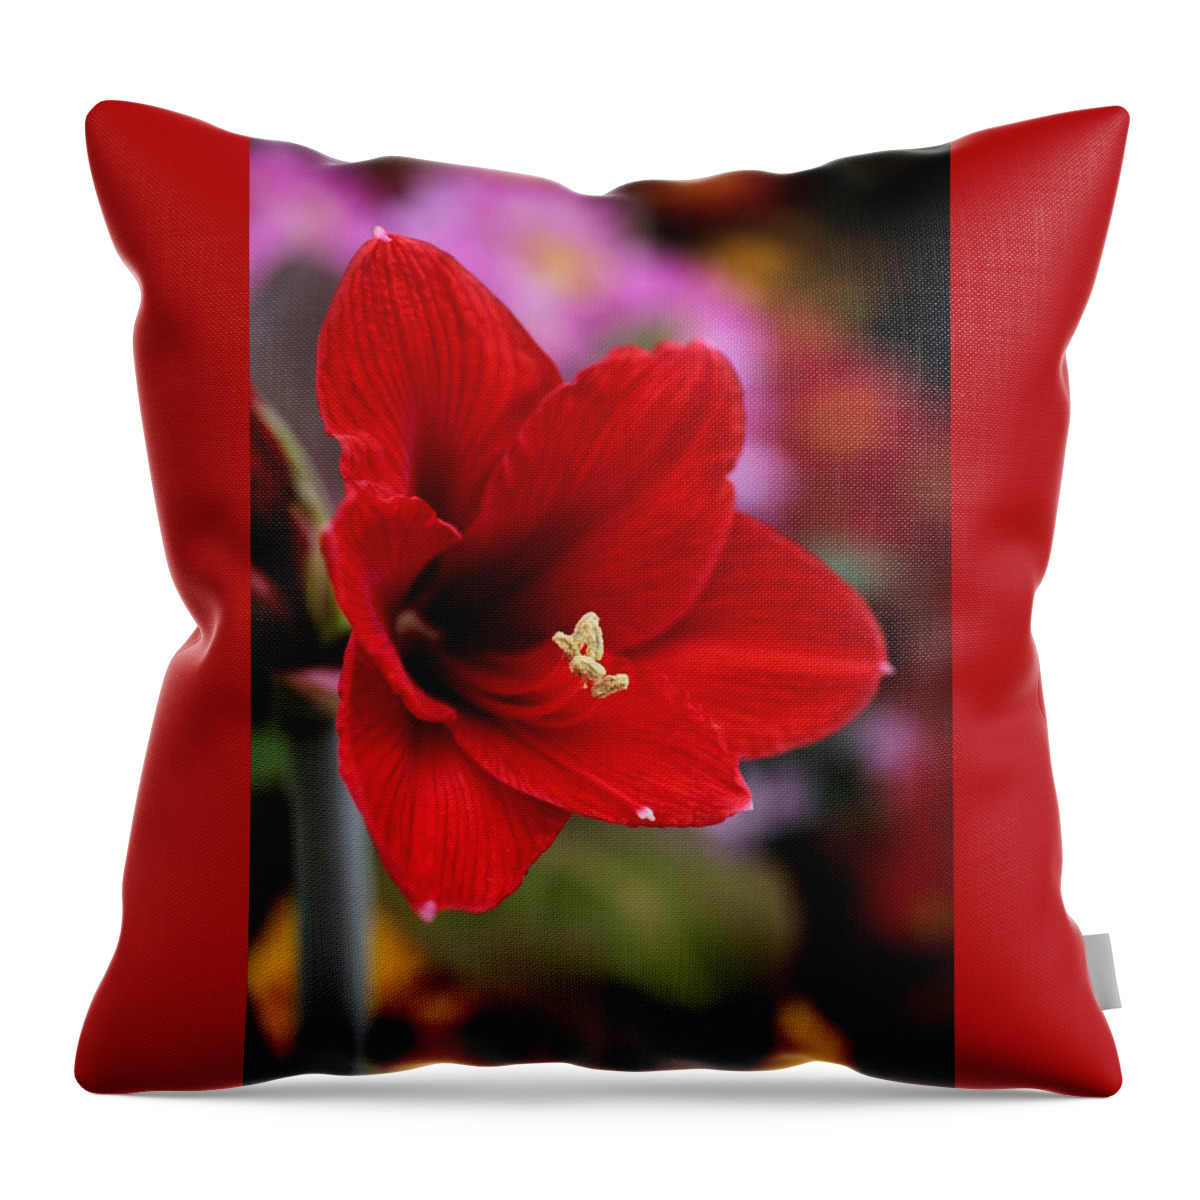 Amaryllis Throw Pillow featuring the photograph Red Amaryllis by Tammy Pool